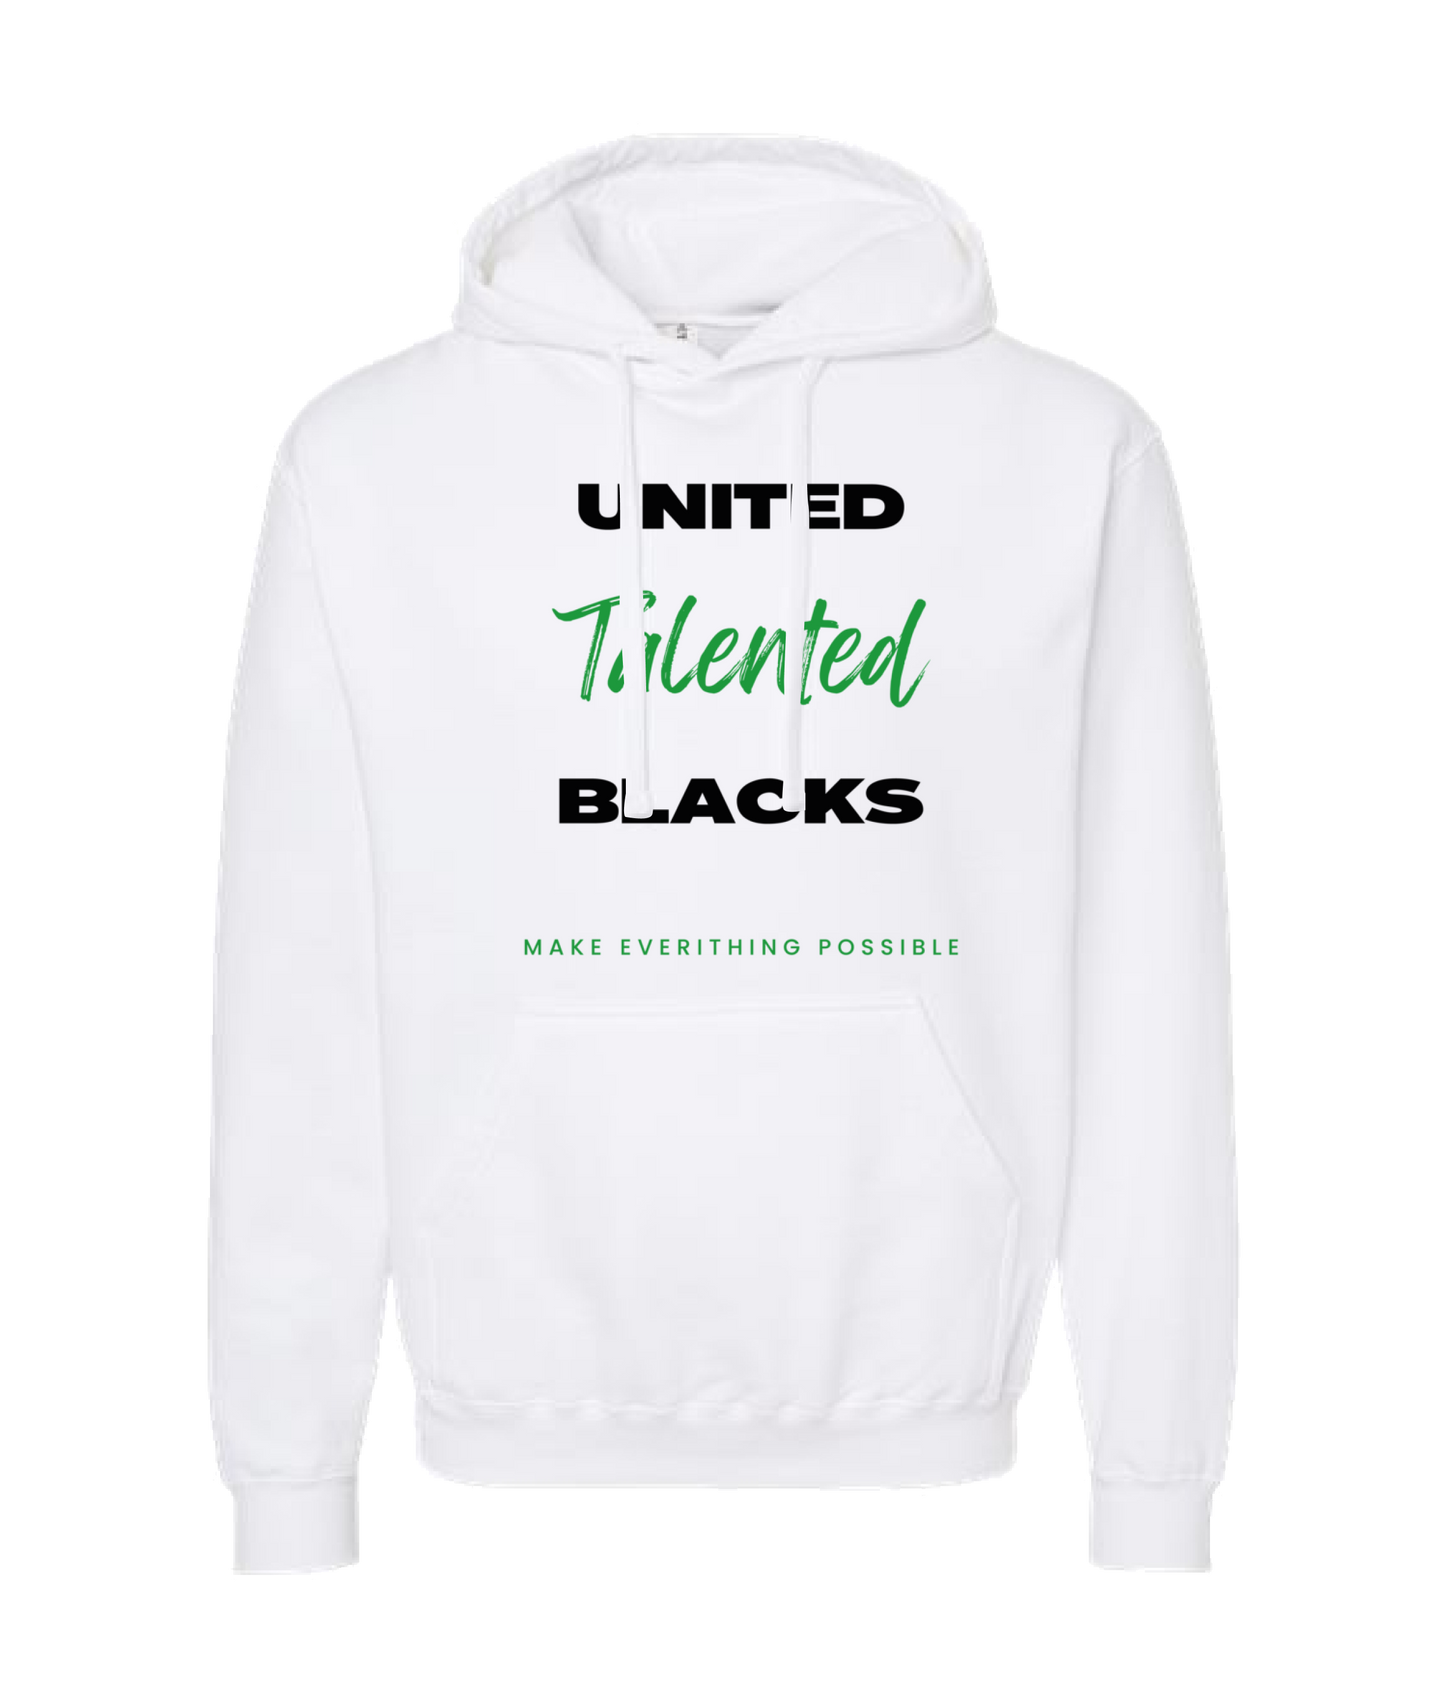 Talented Black - MAKE EVERYTHING POSSIBLE - White Hoodie